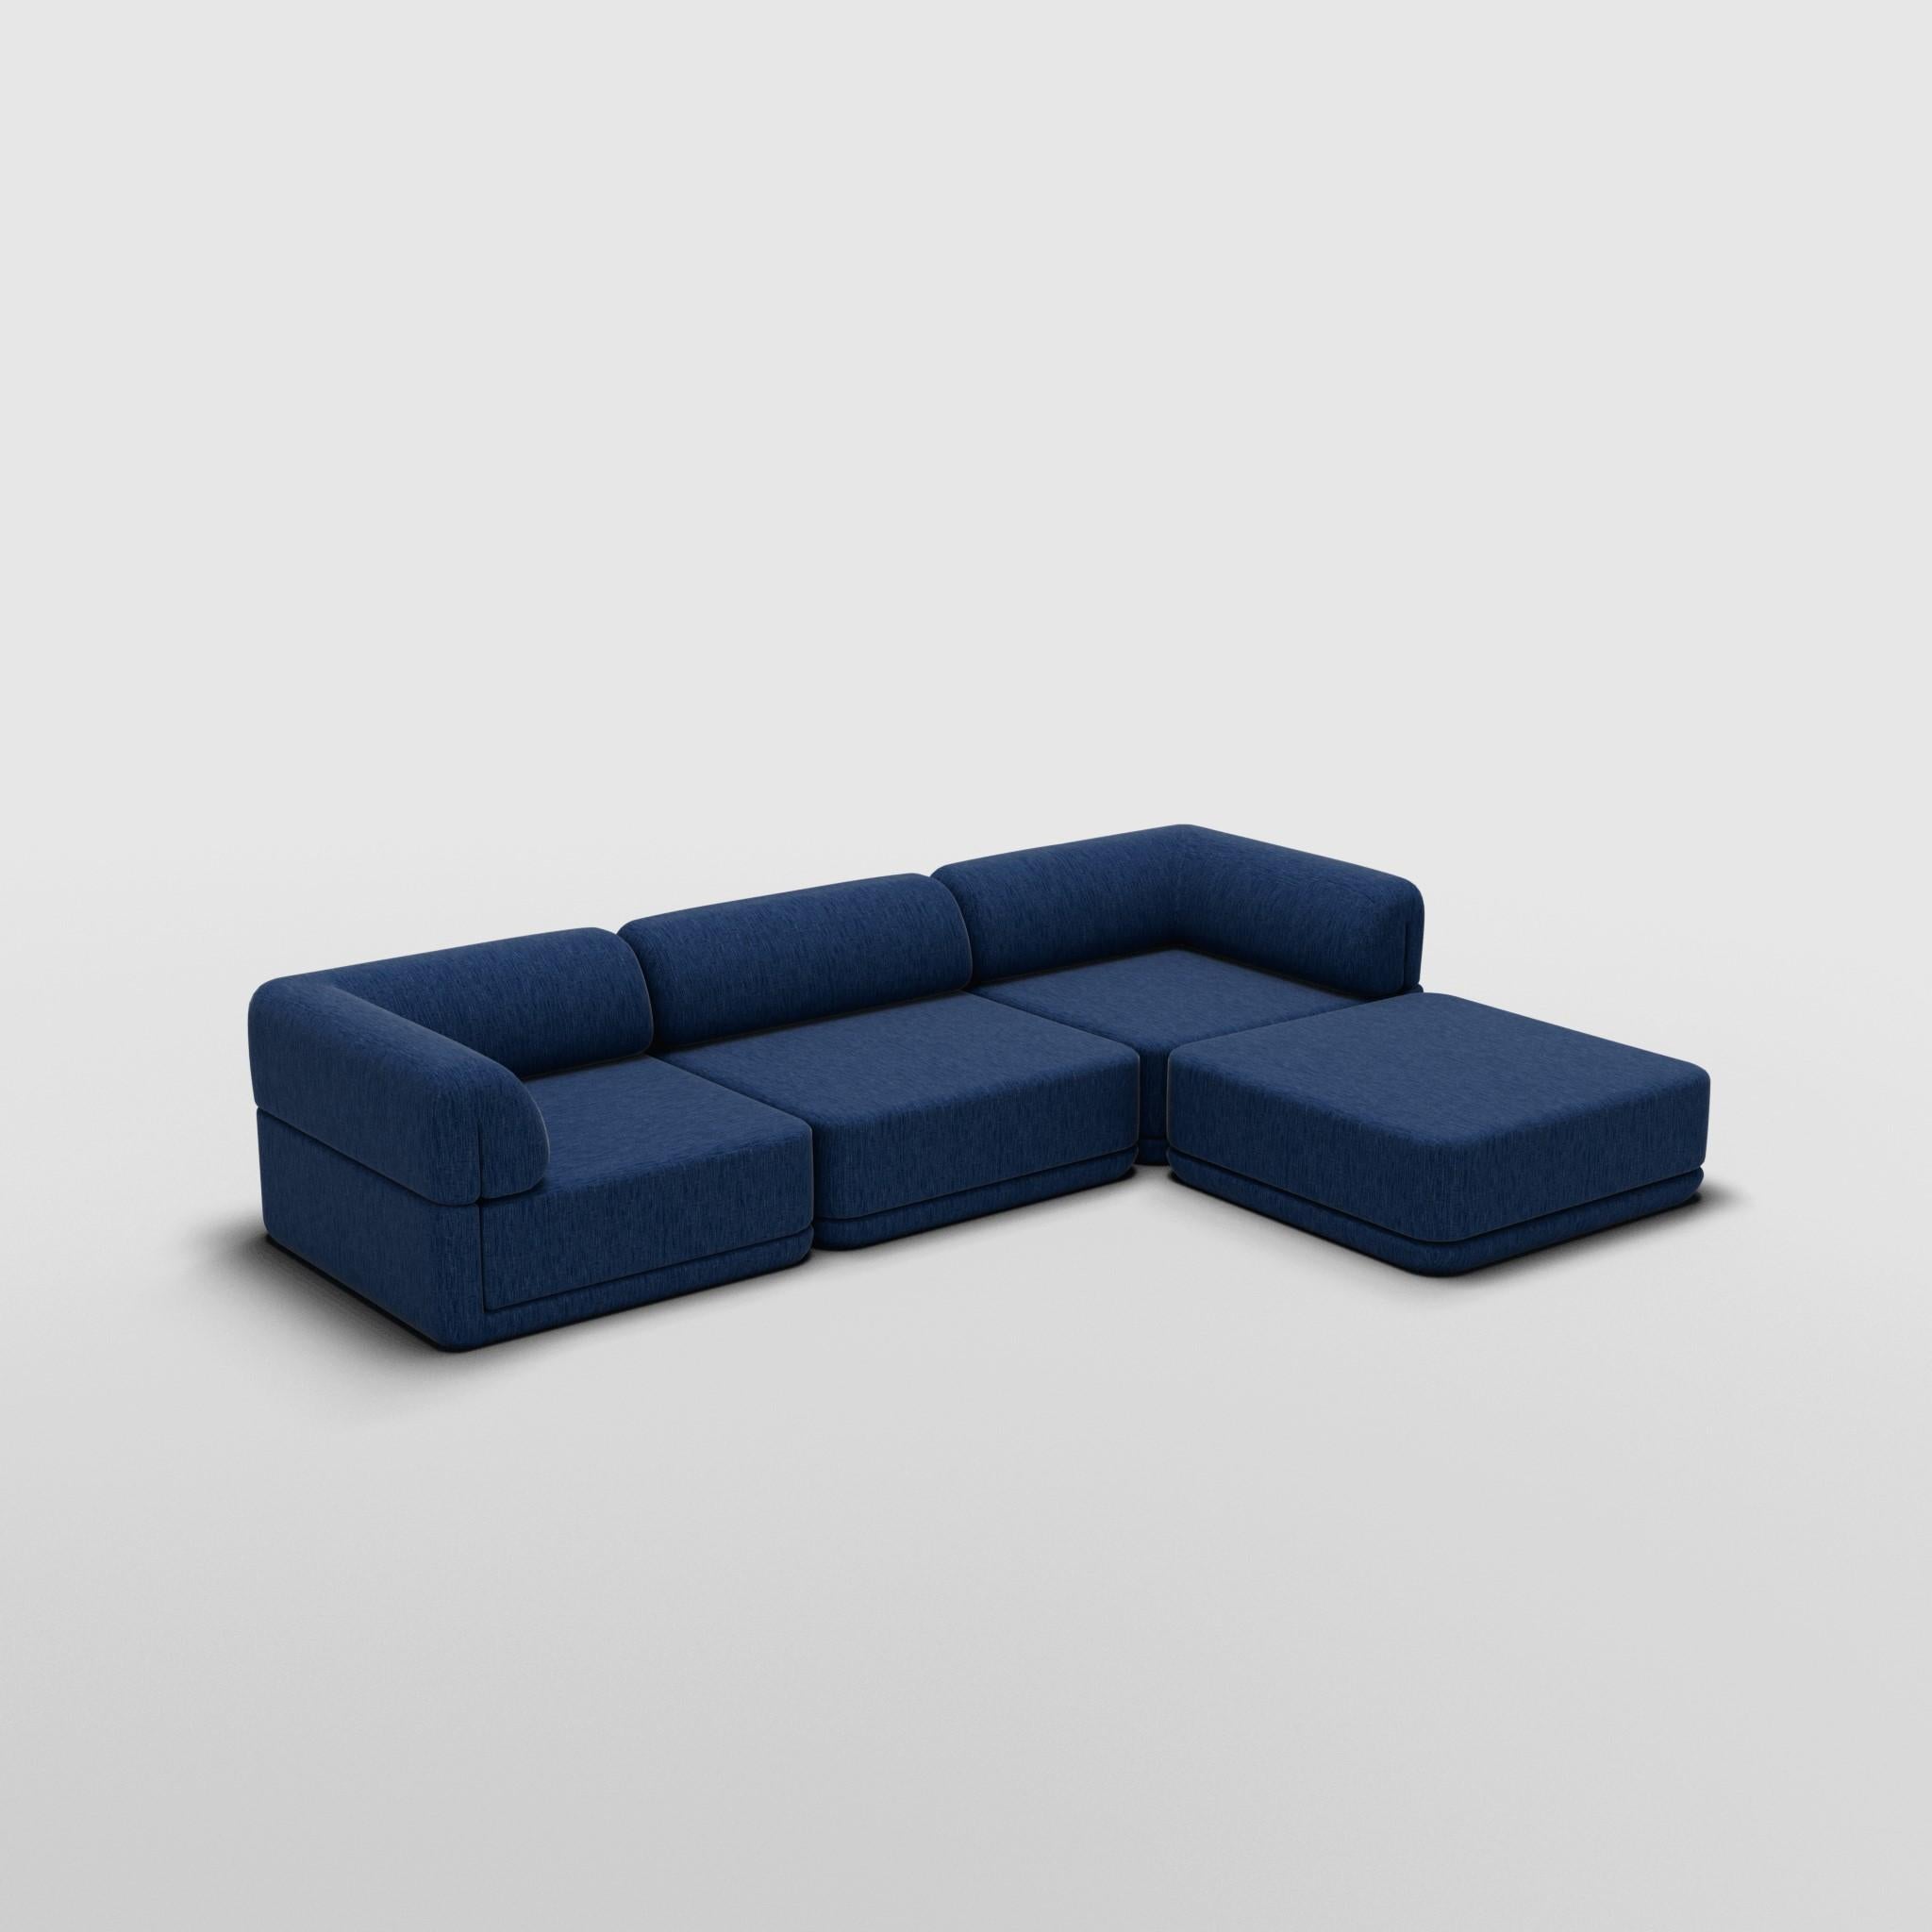 Contemporary The Cube Sofa - Sofa Lounge with Ottoman For Sale